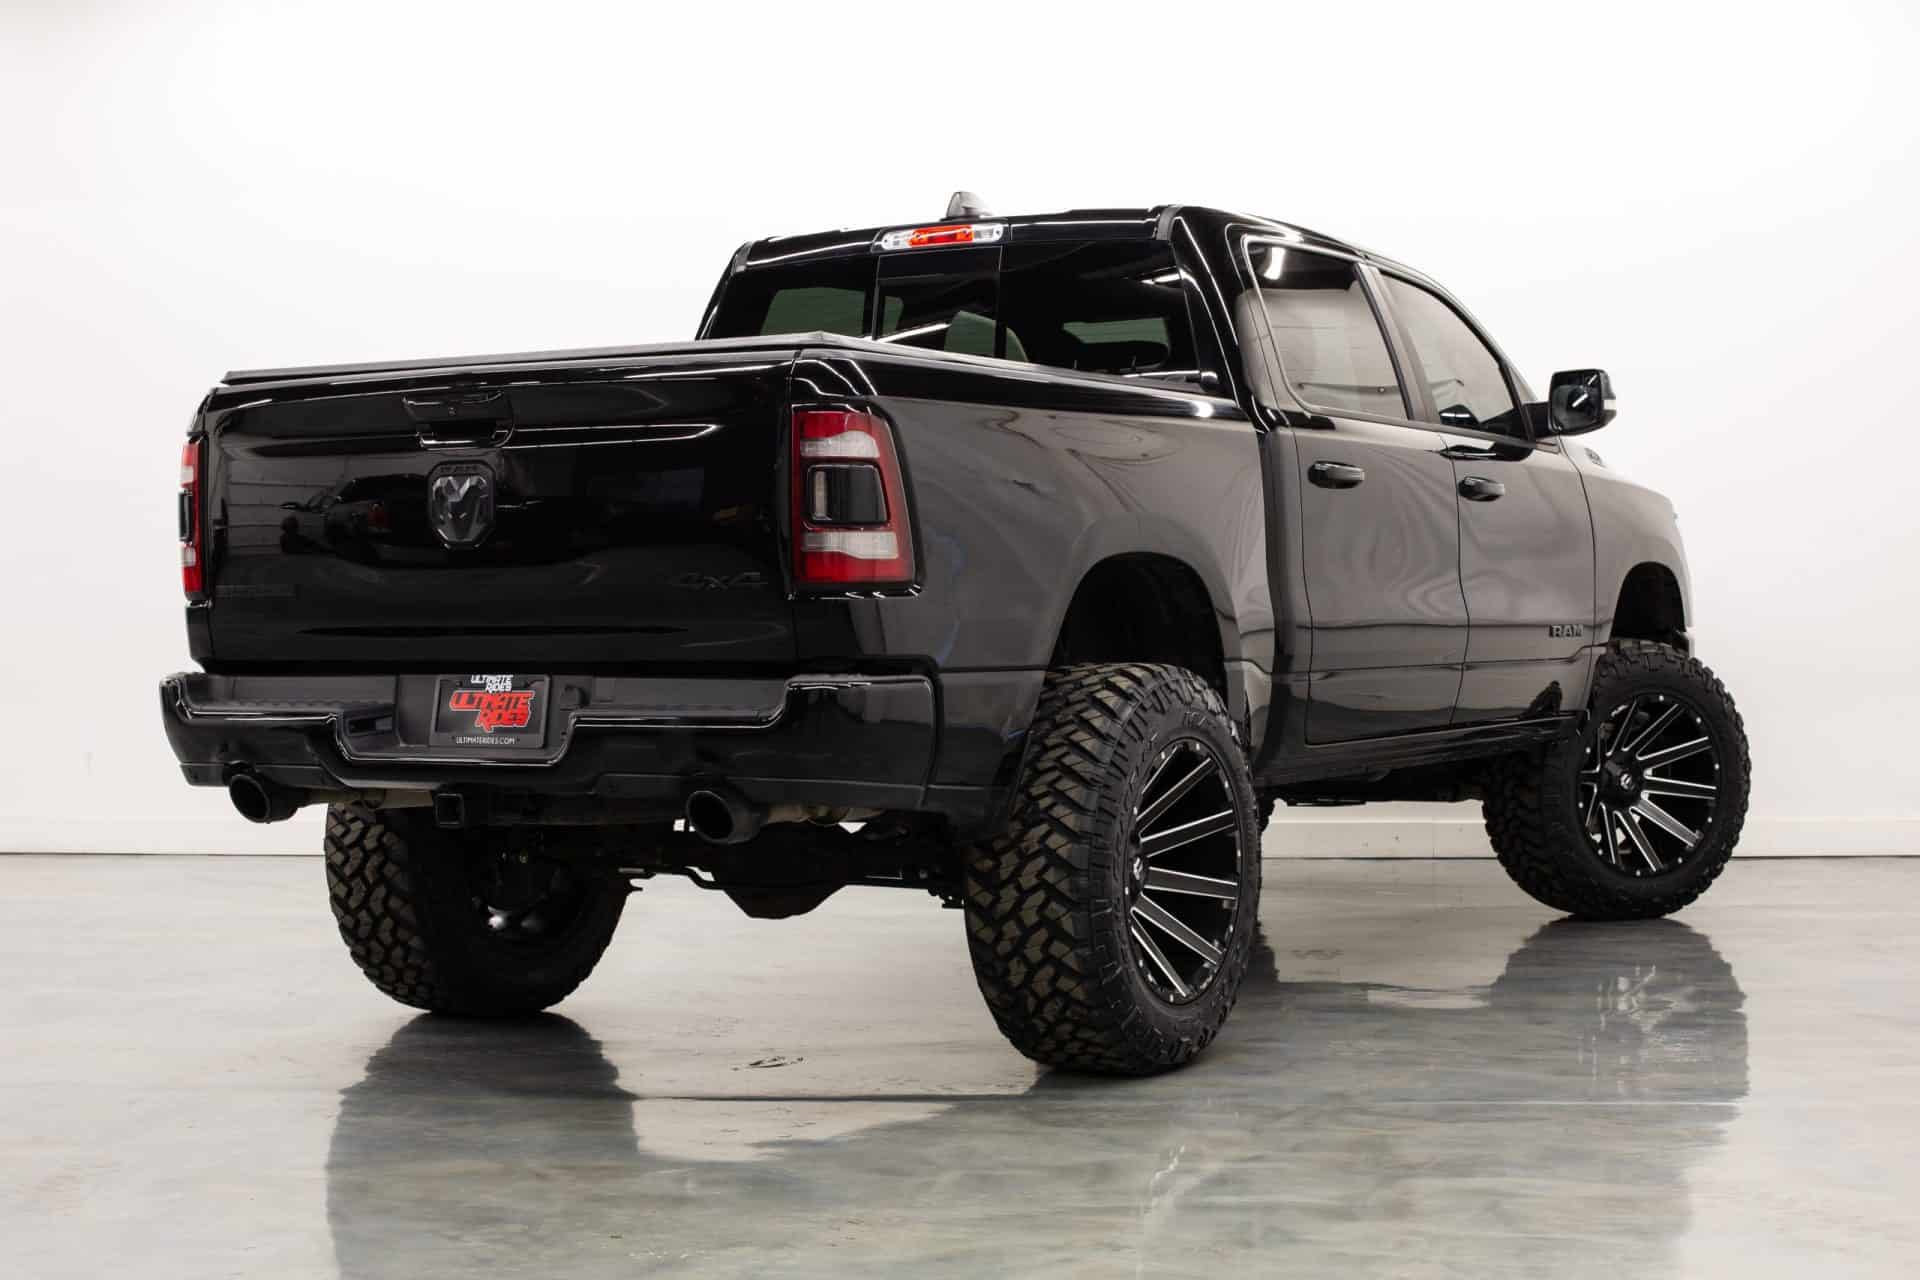 Lifted Trucks for Sale in Maine